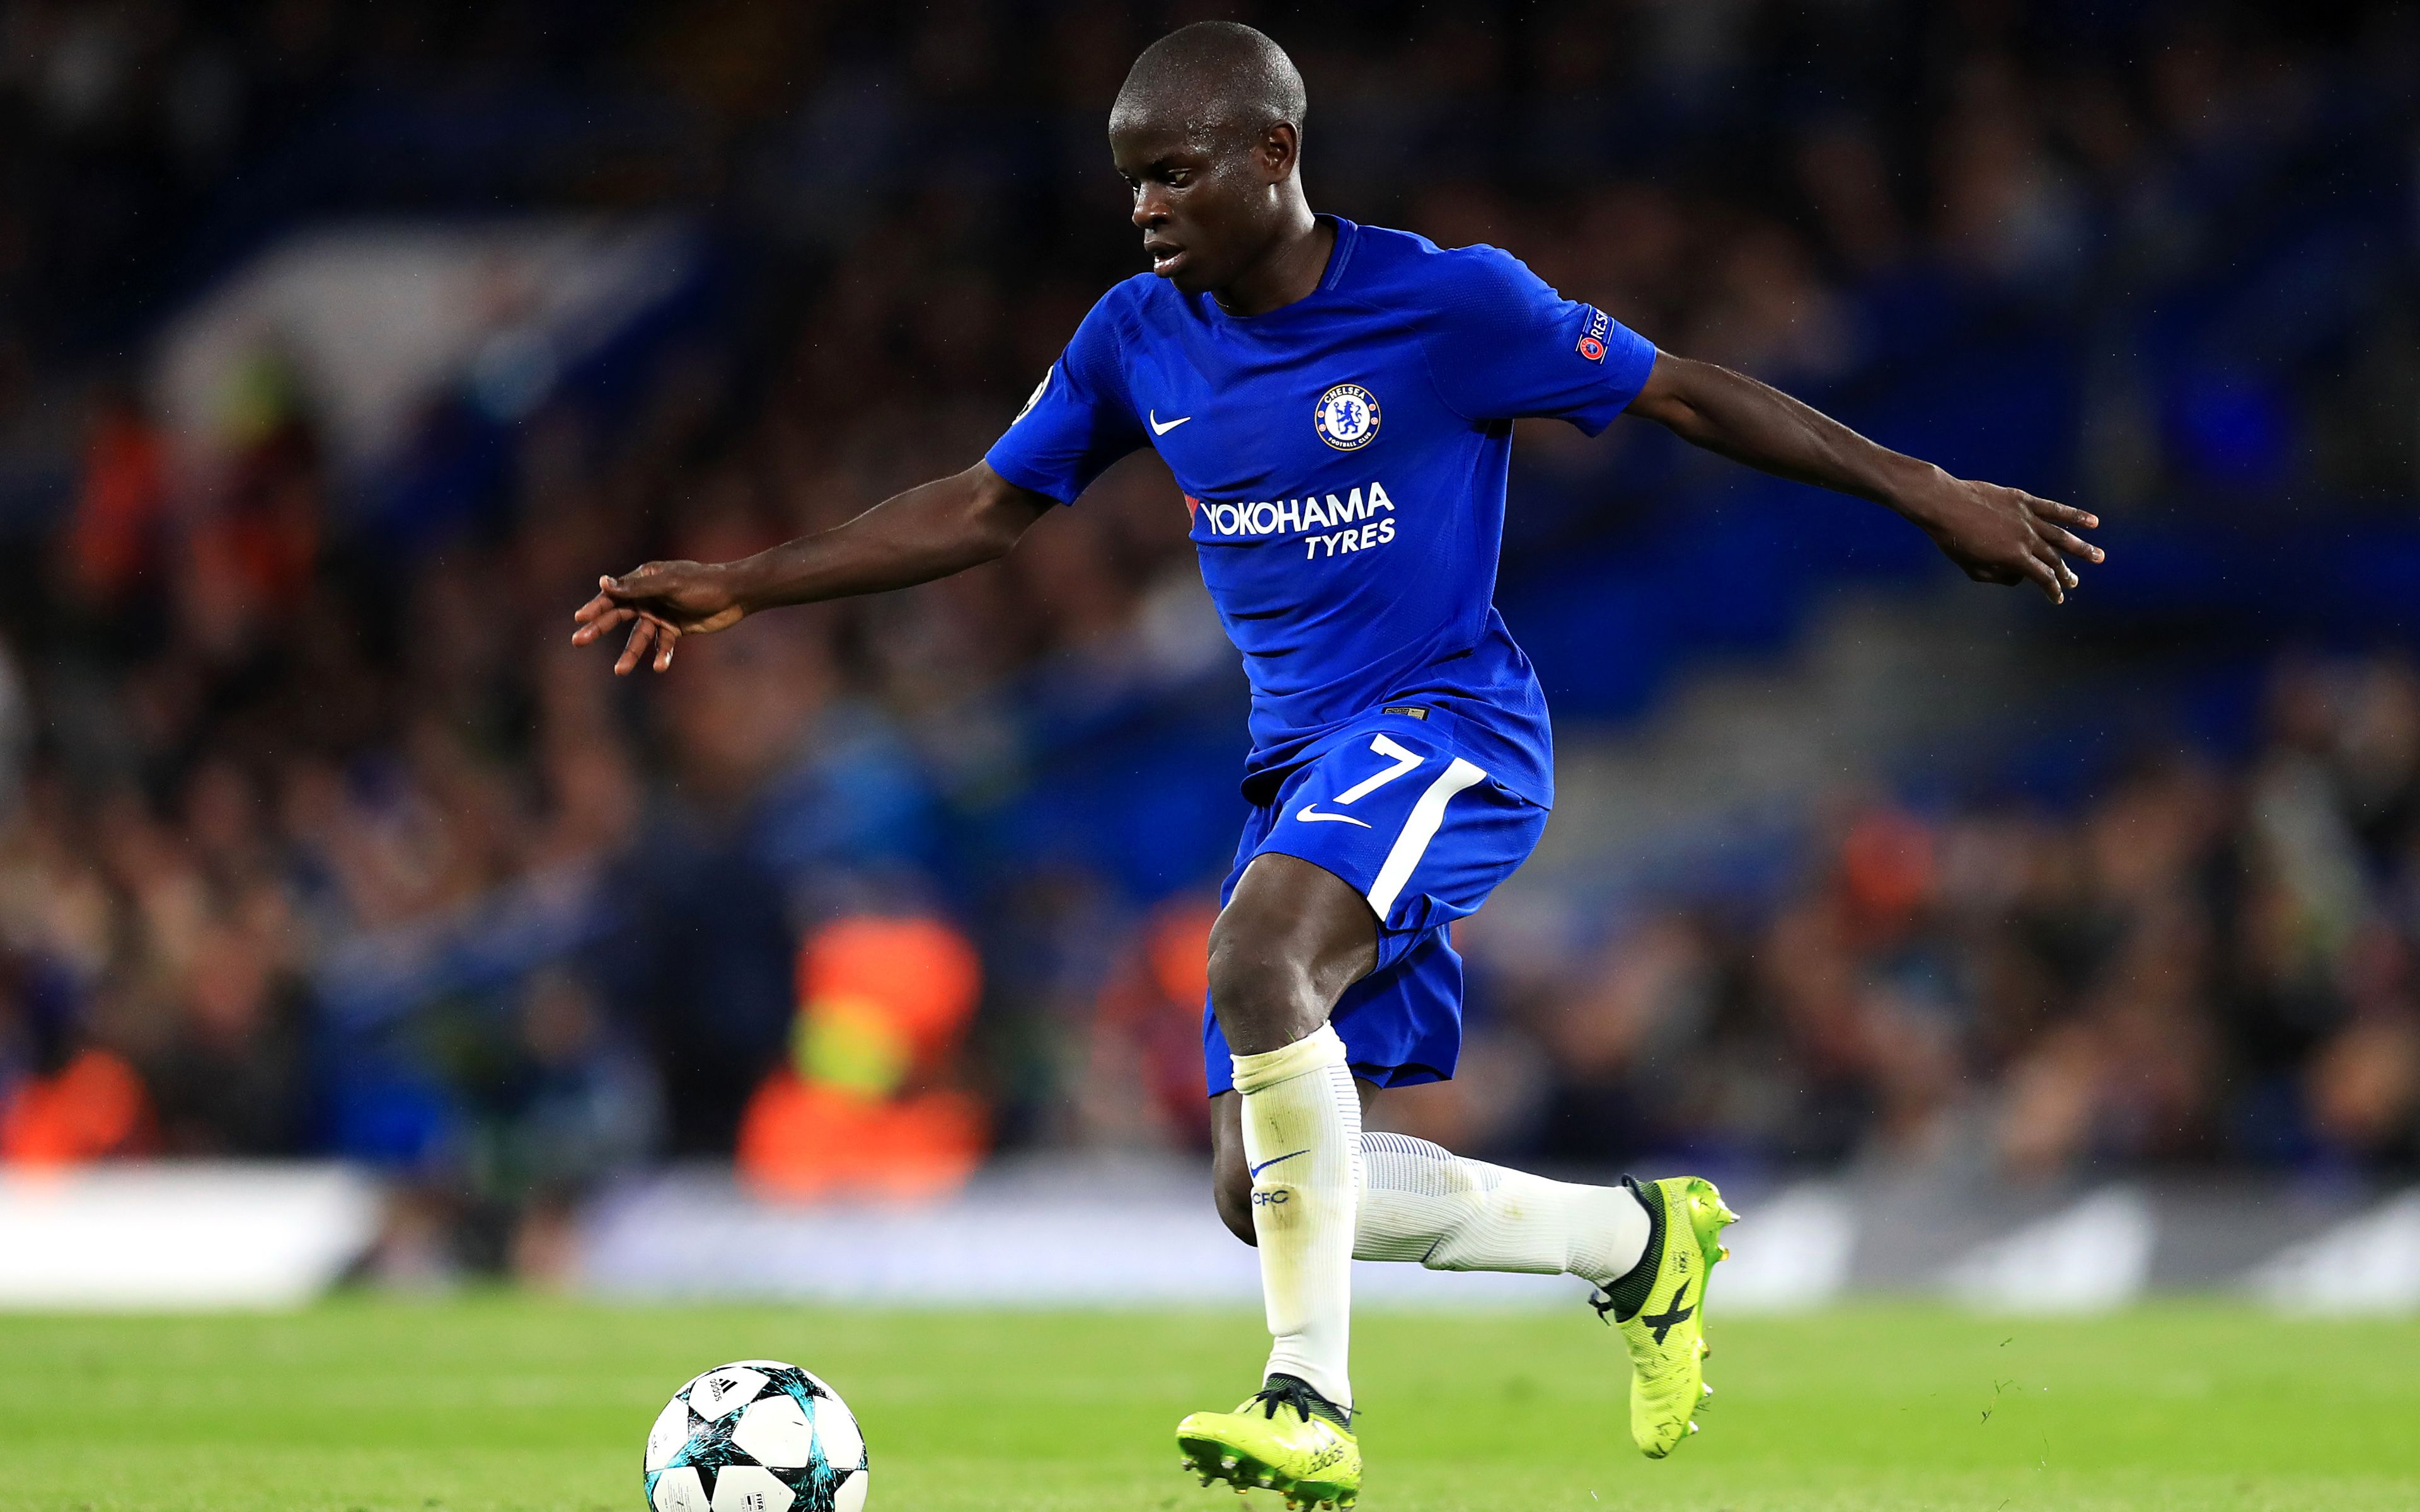 Download wallpaper Kante, 4k, soccer, Chelsea FC, N Golo Kante, Premier League, footballers, Chelsea for desktop with resolution 3840x2400. High Quality HD picture wallpaper